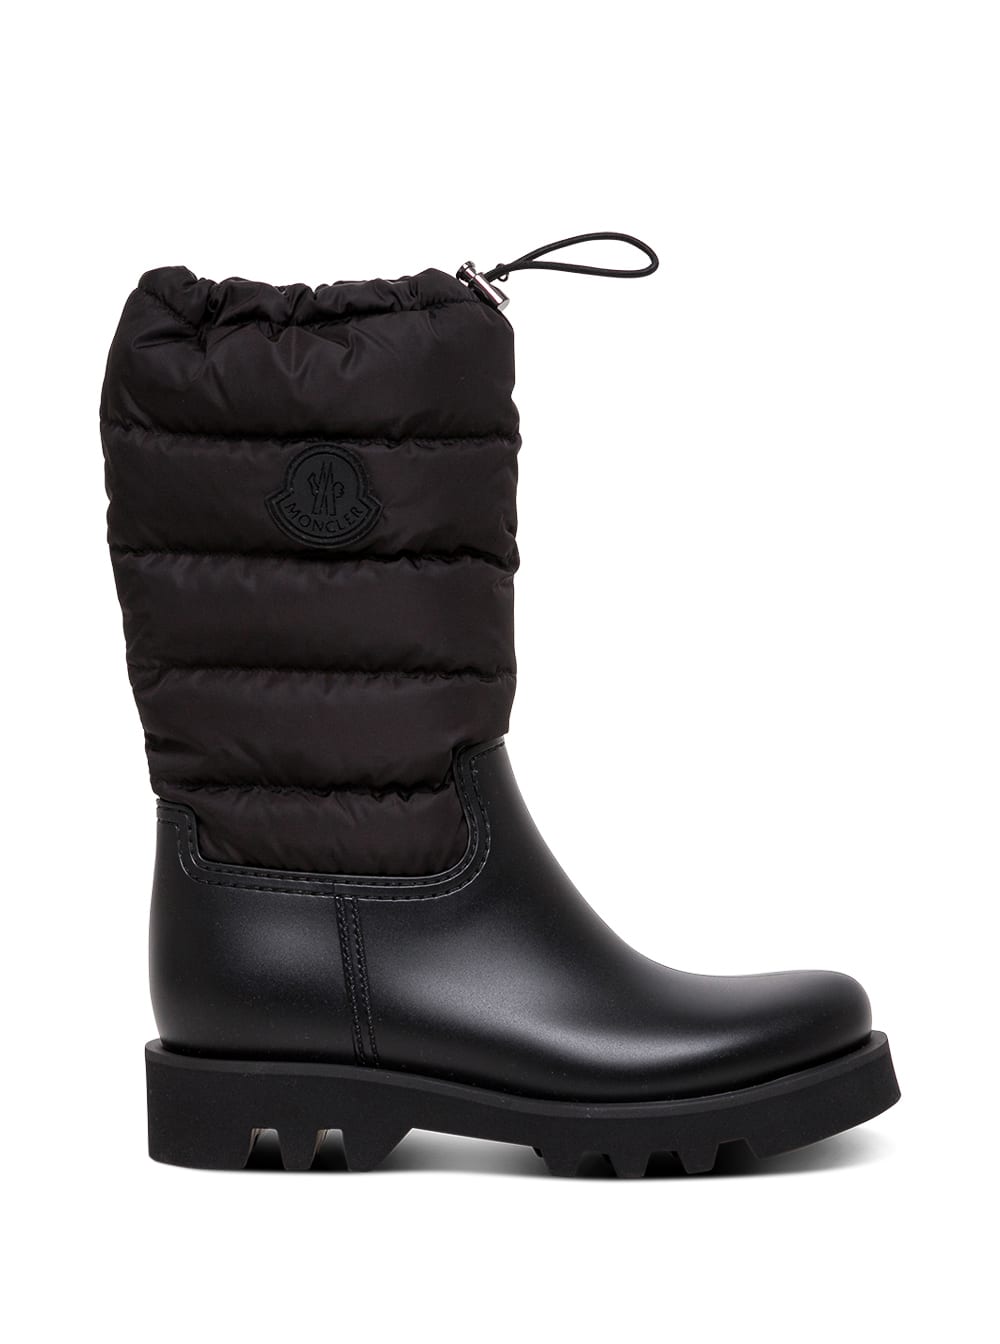 Moncler Ginette Quilted Rain Boots